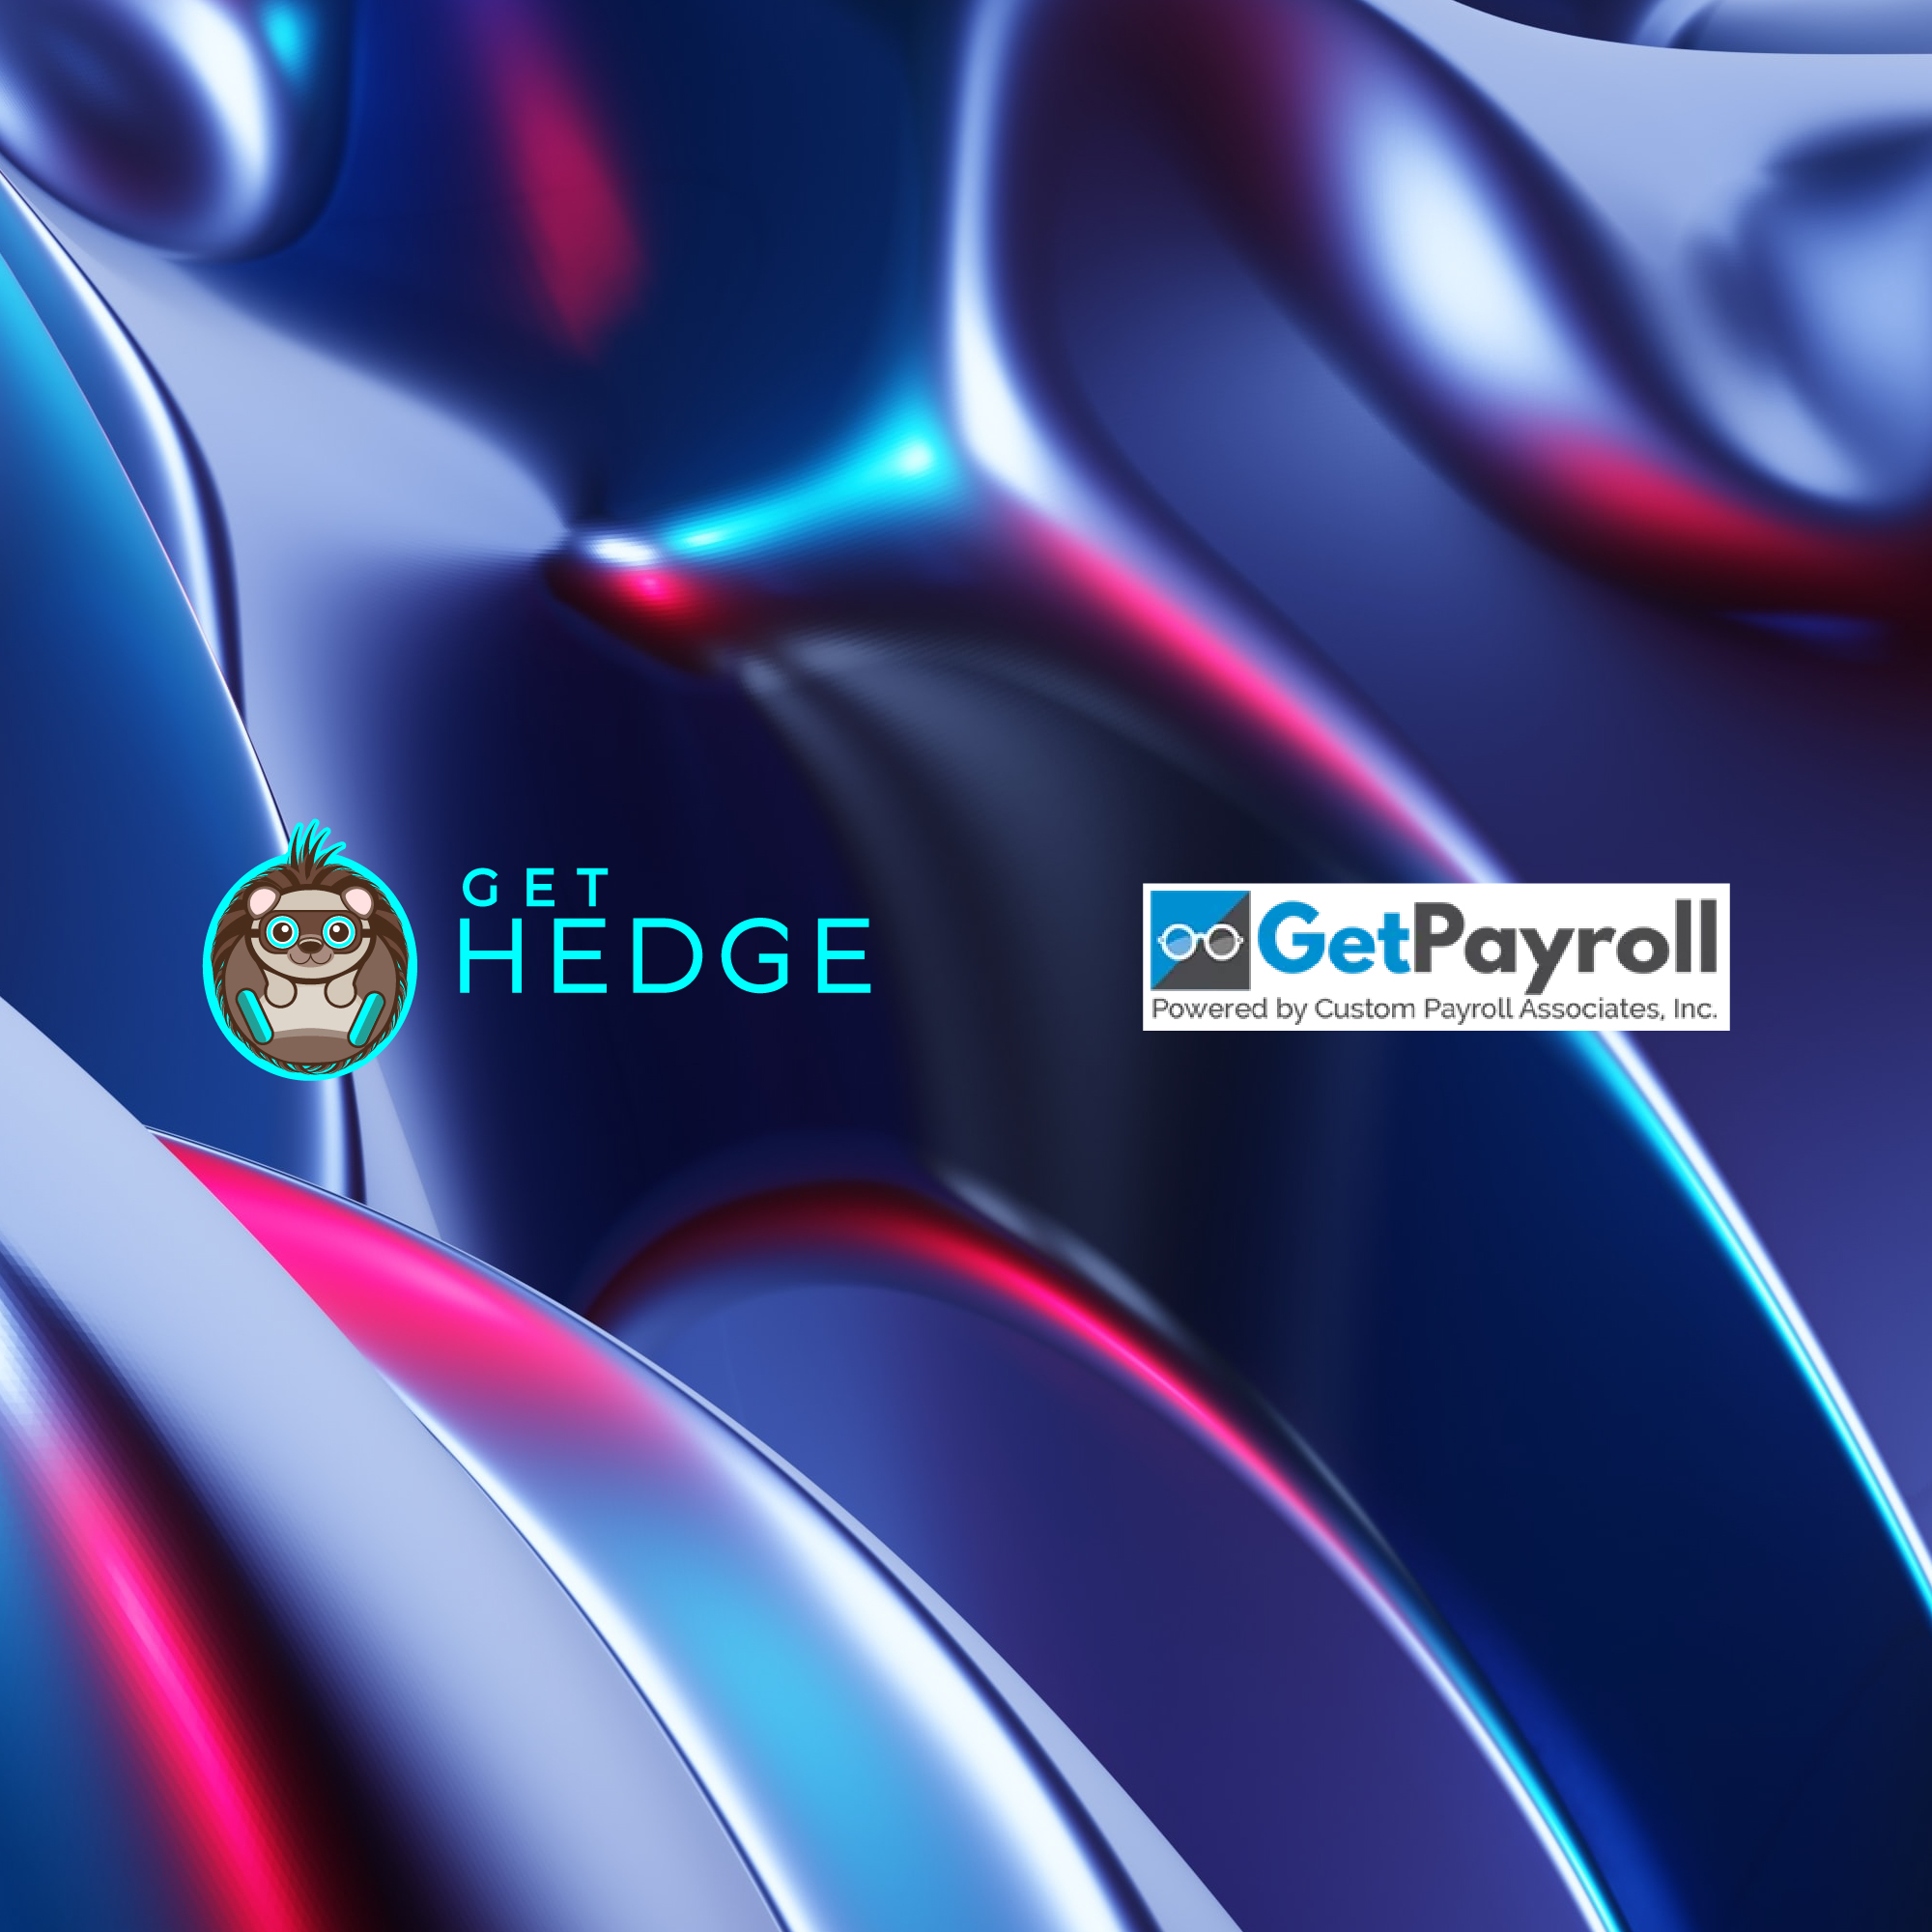 GetHedge Partners With GetPayroll to Offer First-Ever Crypto Payroll Program